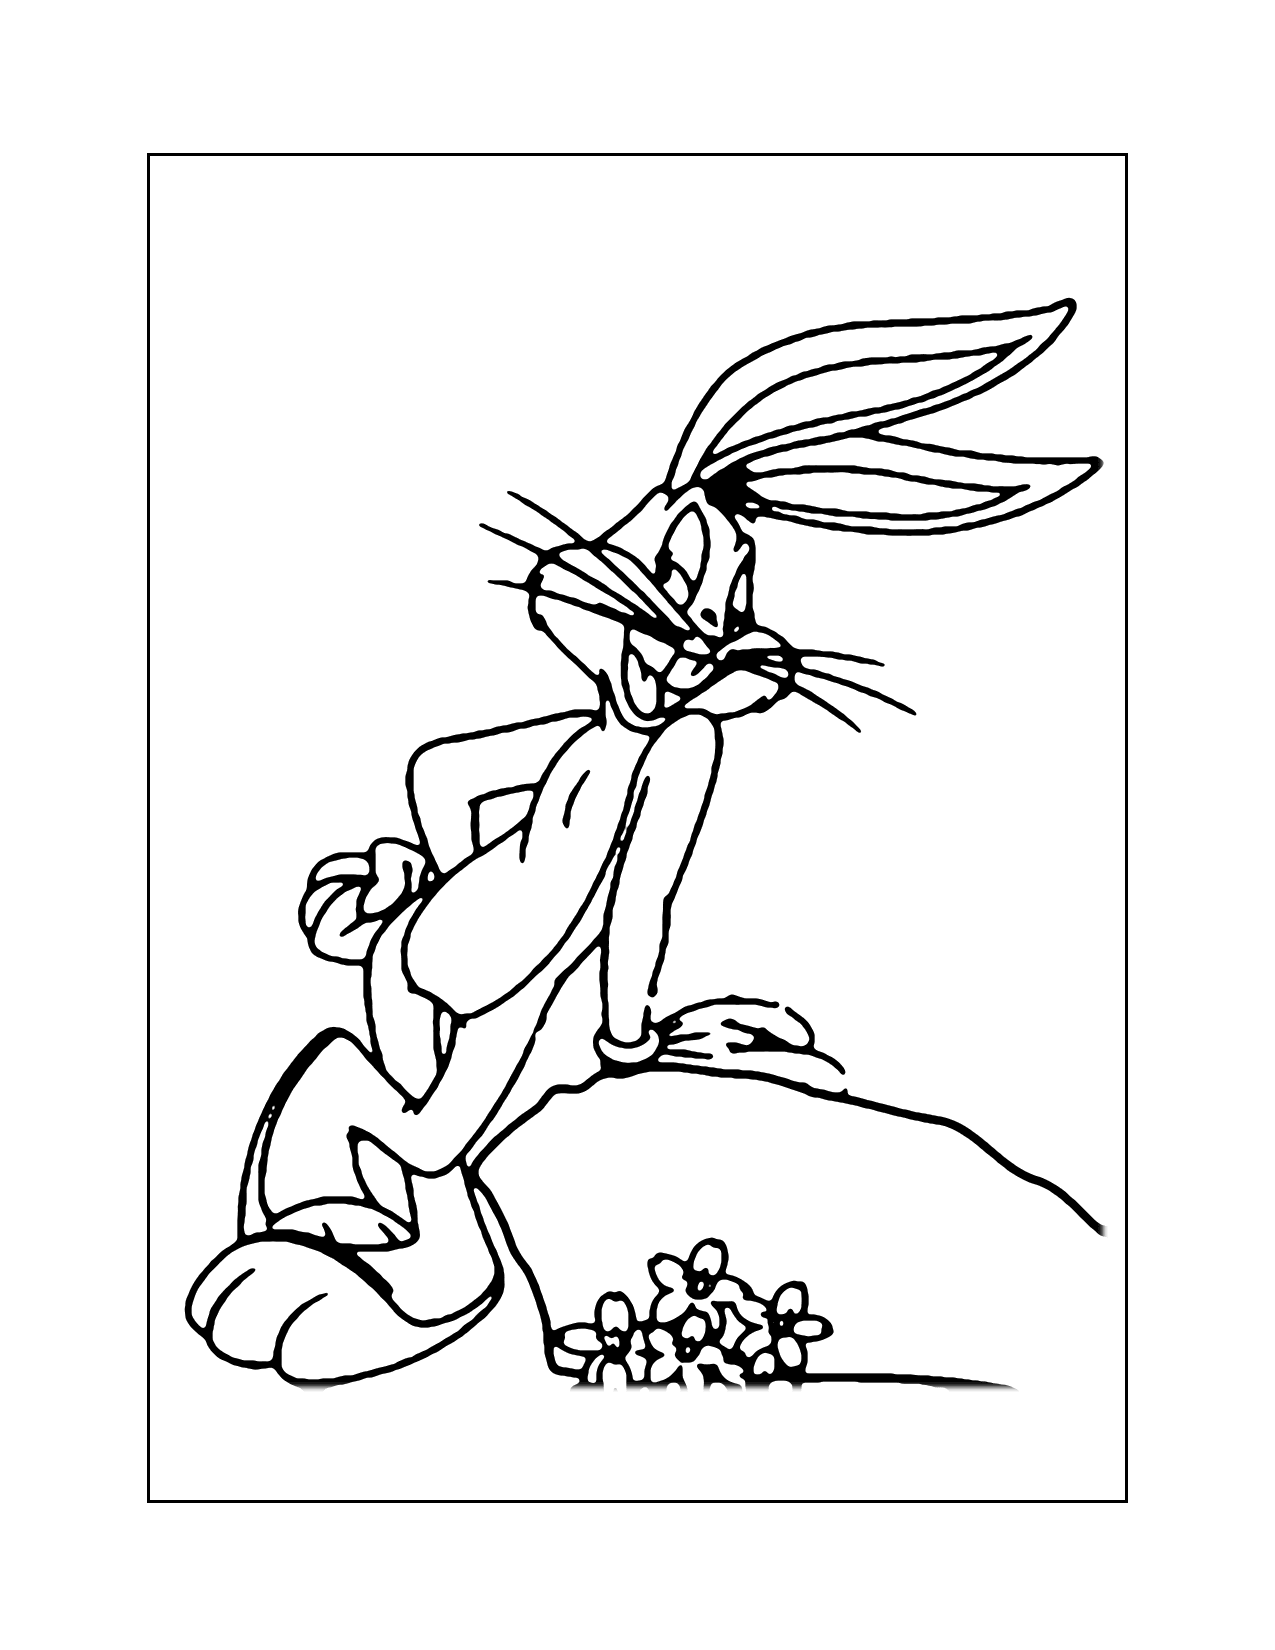 Classic Bugs Bunny Coloring Page